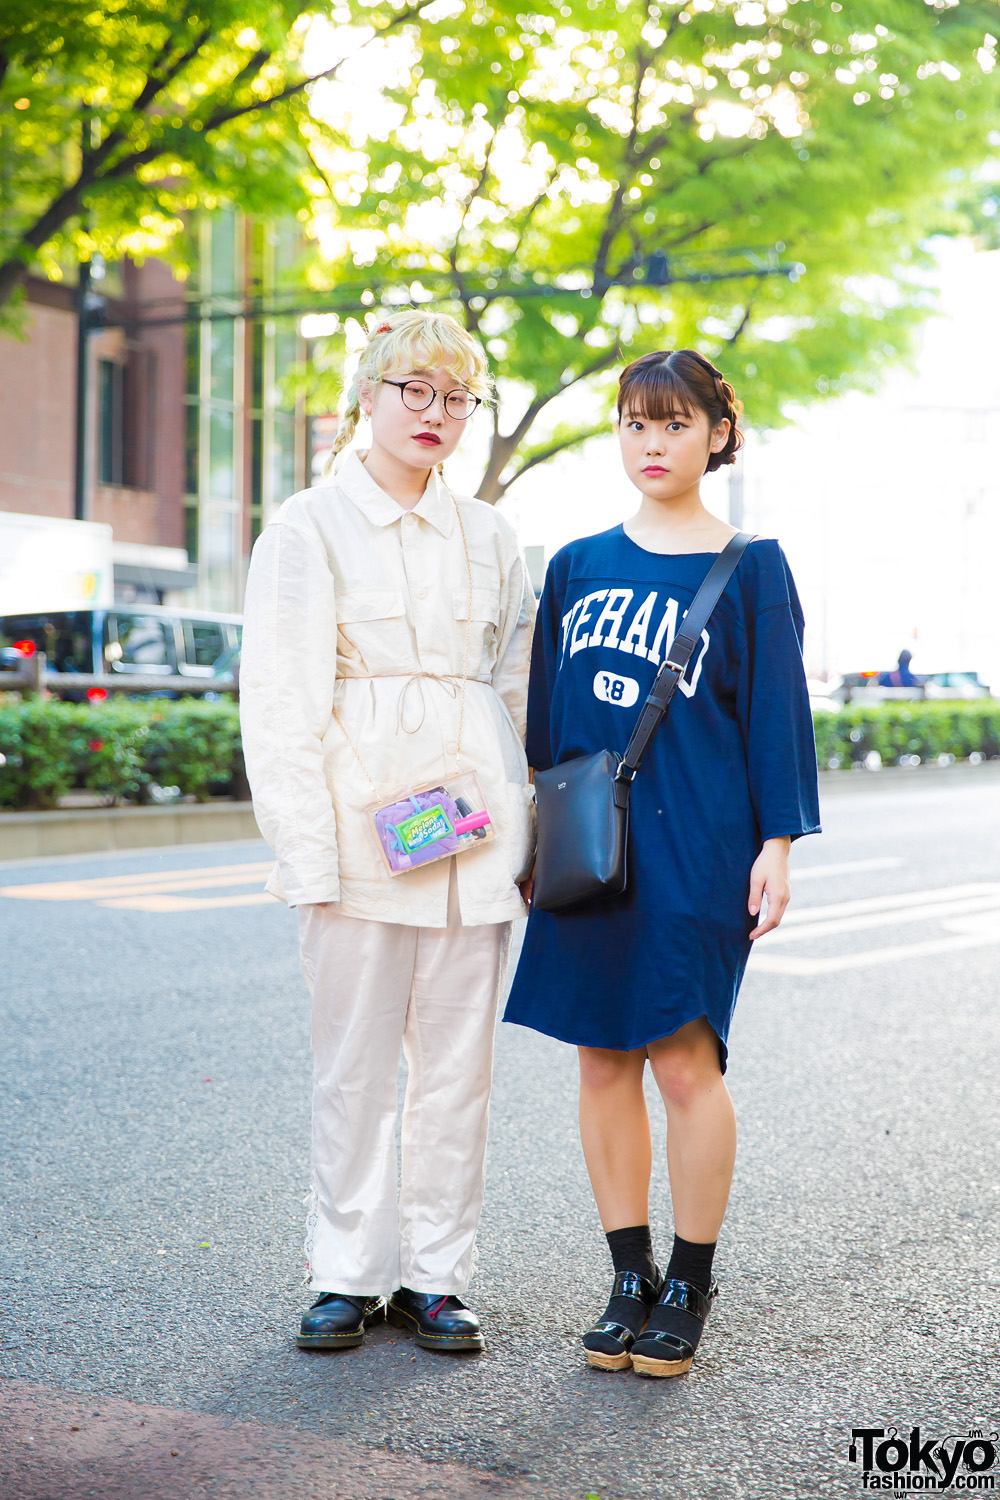 Tokyo Vintage Street Styles w/ Rodeo Crowns, Lui’s, Marc Jacobs & Dr. Martens